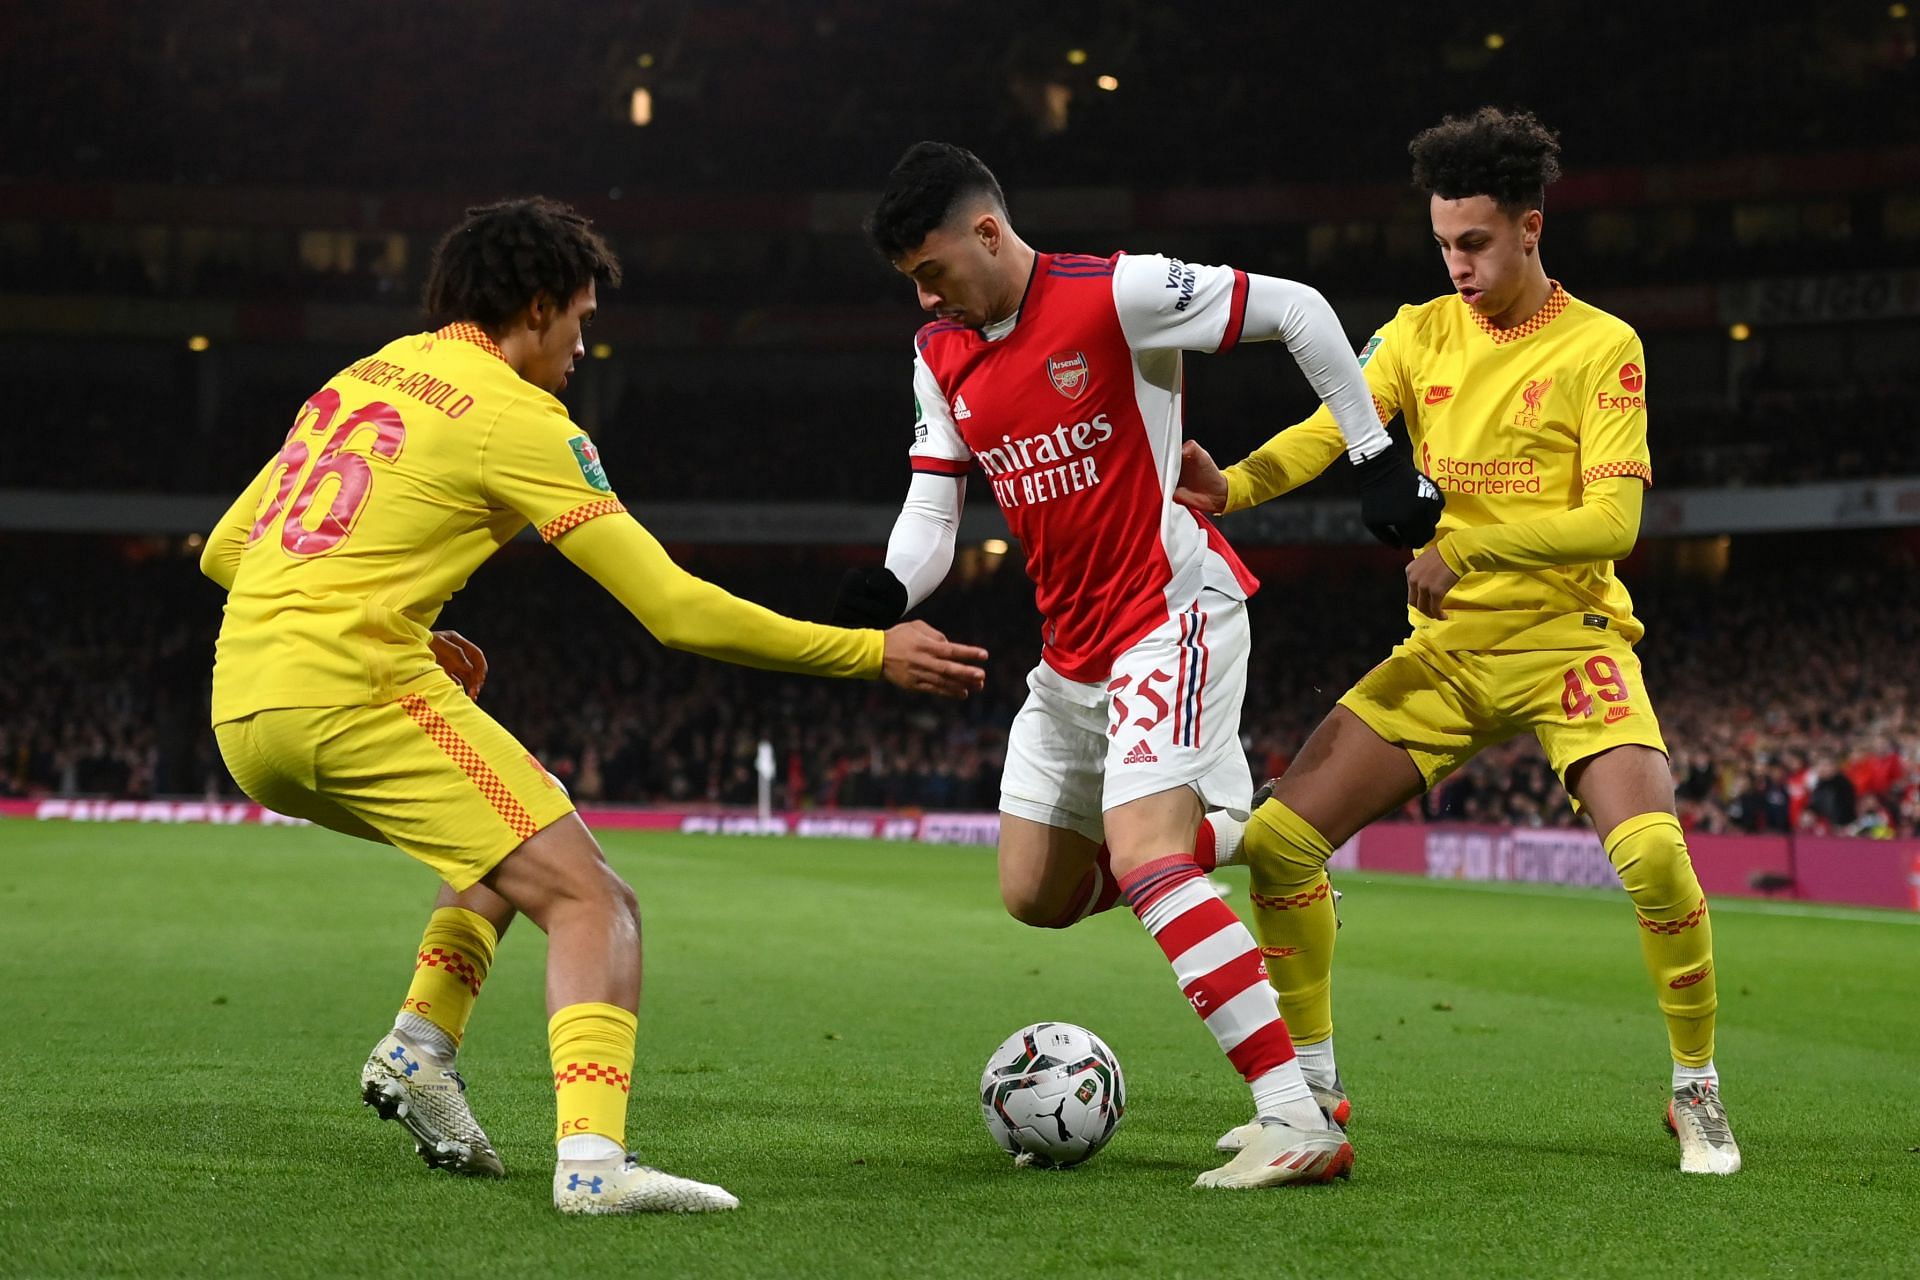 Arsenal&#039;s Gabriel Martinelli was very impressive on the night, but failed to convert his chances.